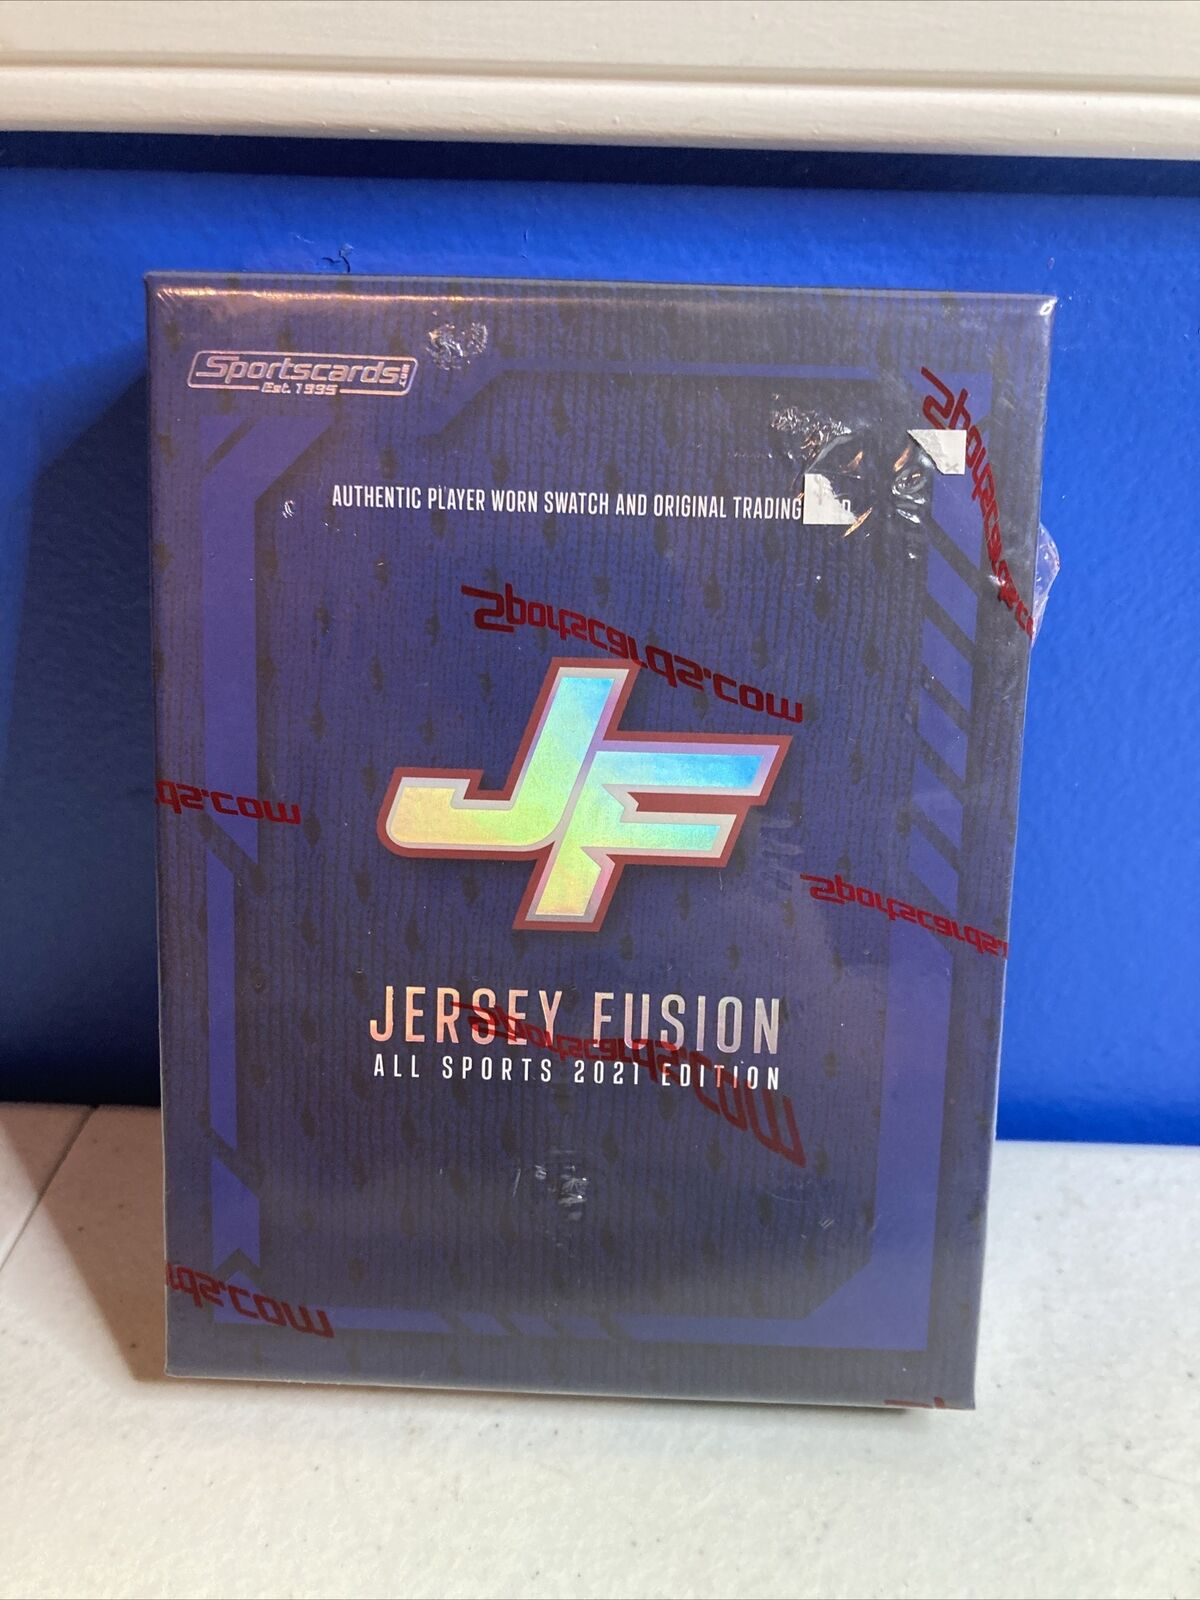 2021 All Sports Edition Jersey Fusion Factory Sealed Box